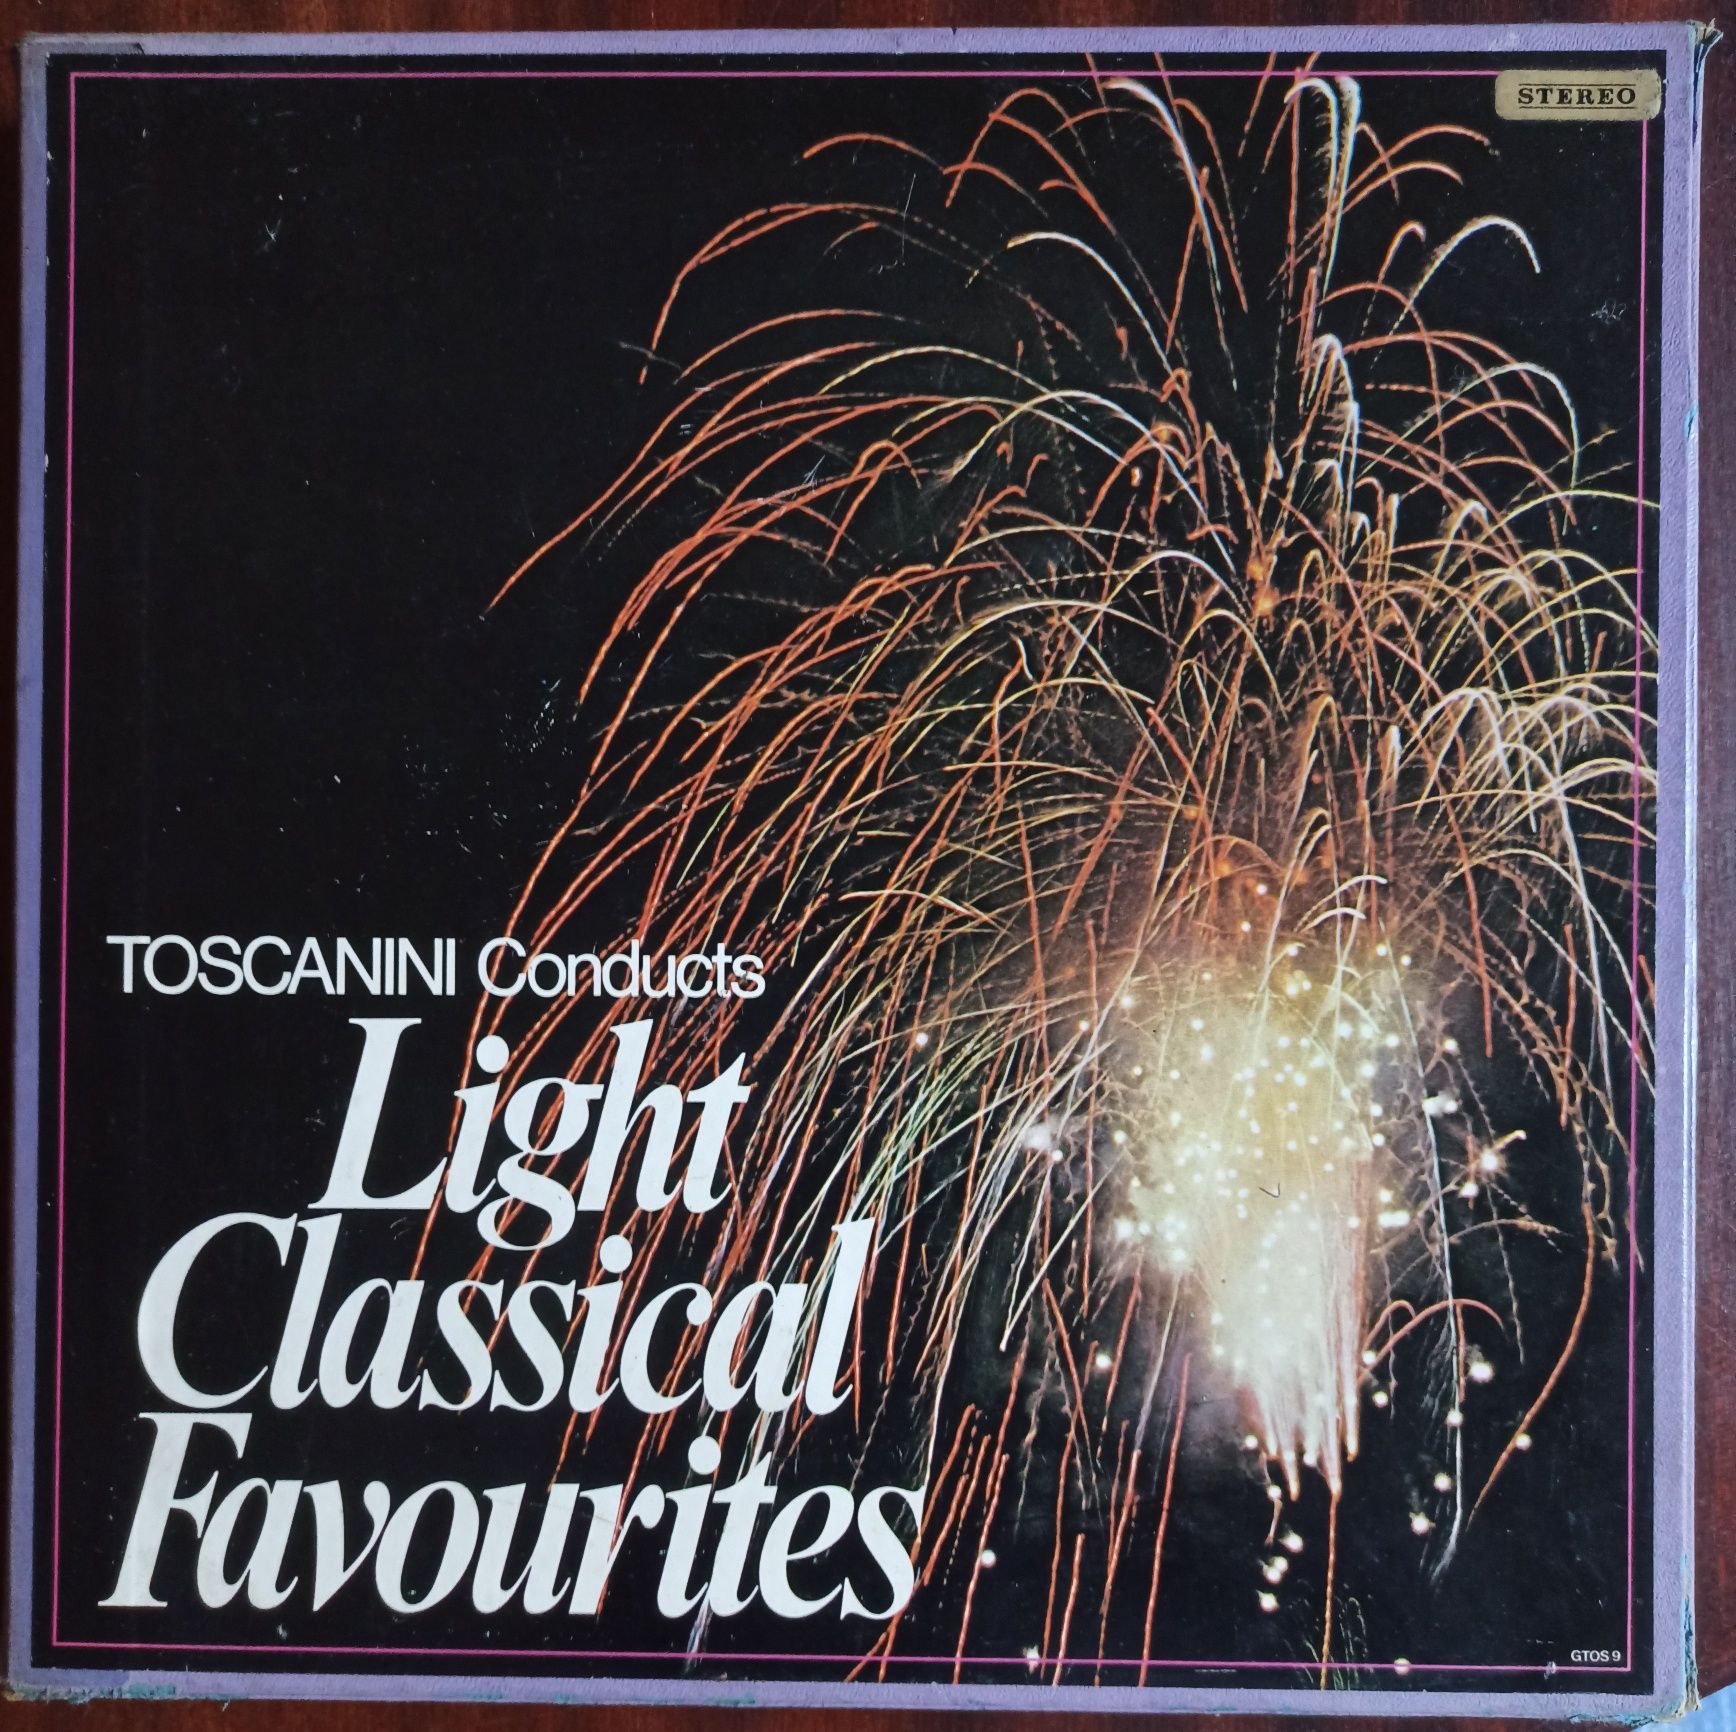 Toscanini conducts Light Classical Favourites + Concert Favourites